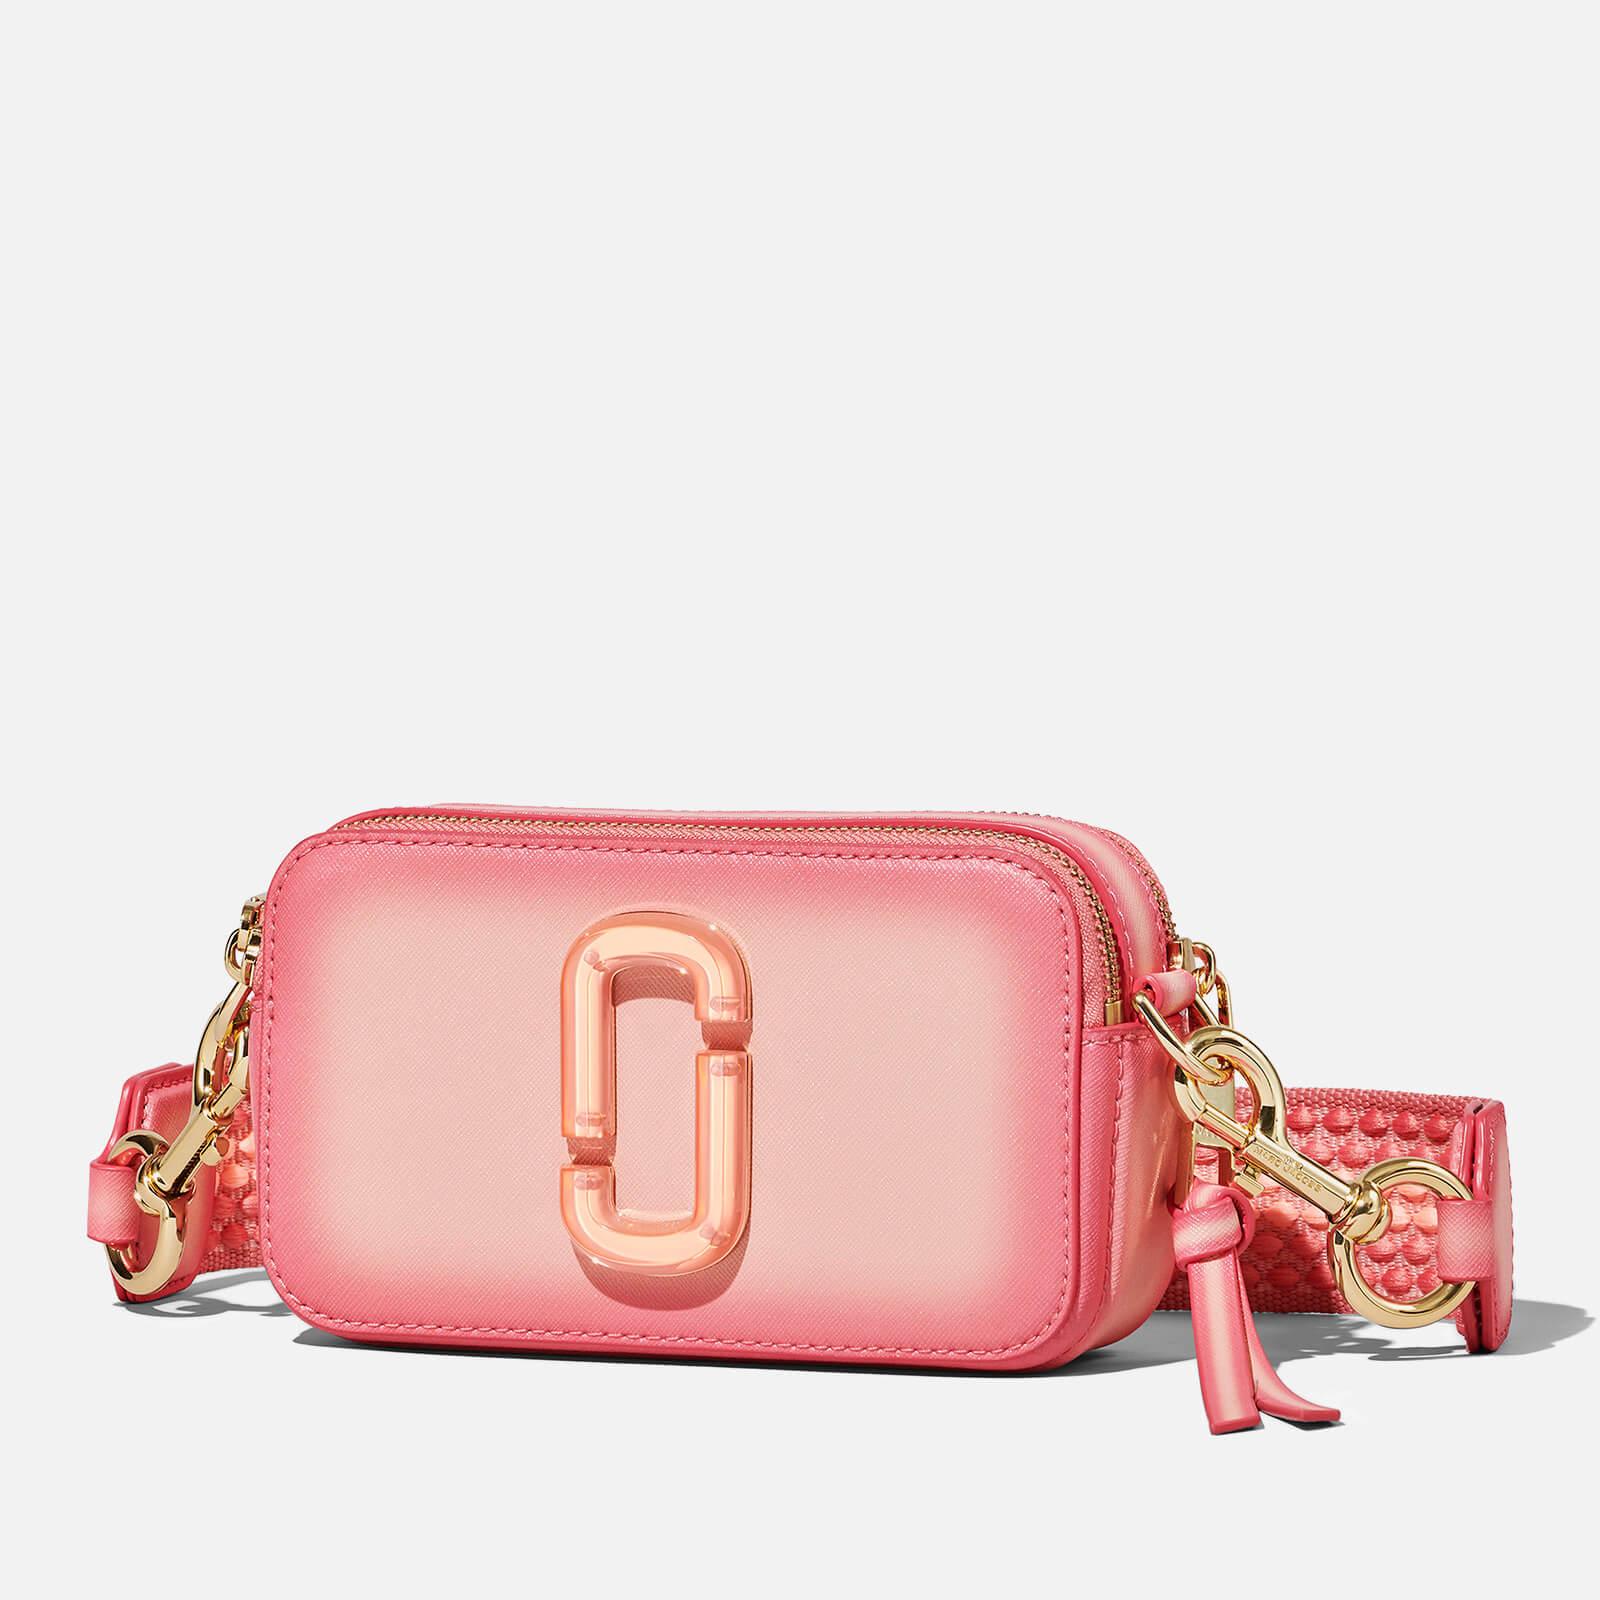 Marc Jacobs Leather The Fluoro Edge Snapshot Bag in Green - Save 